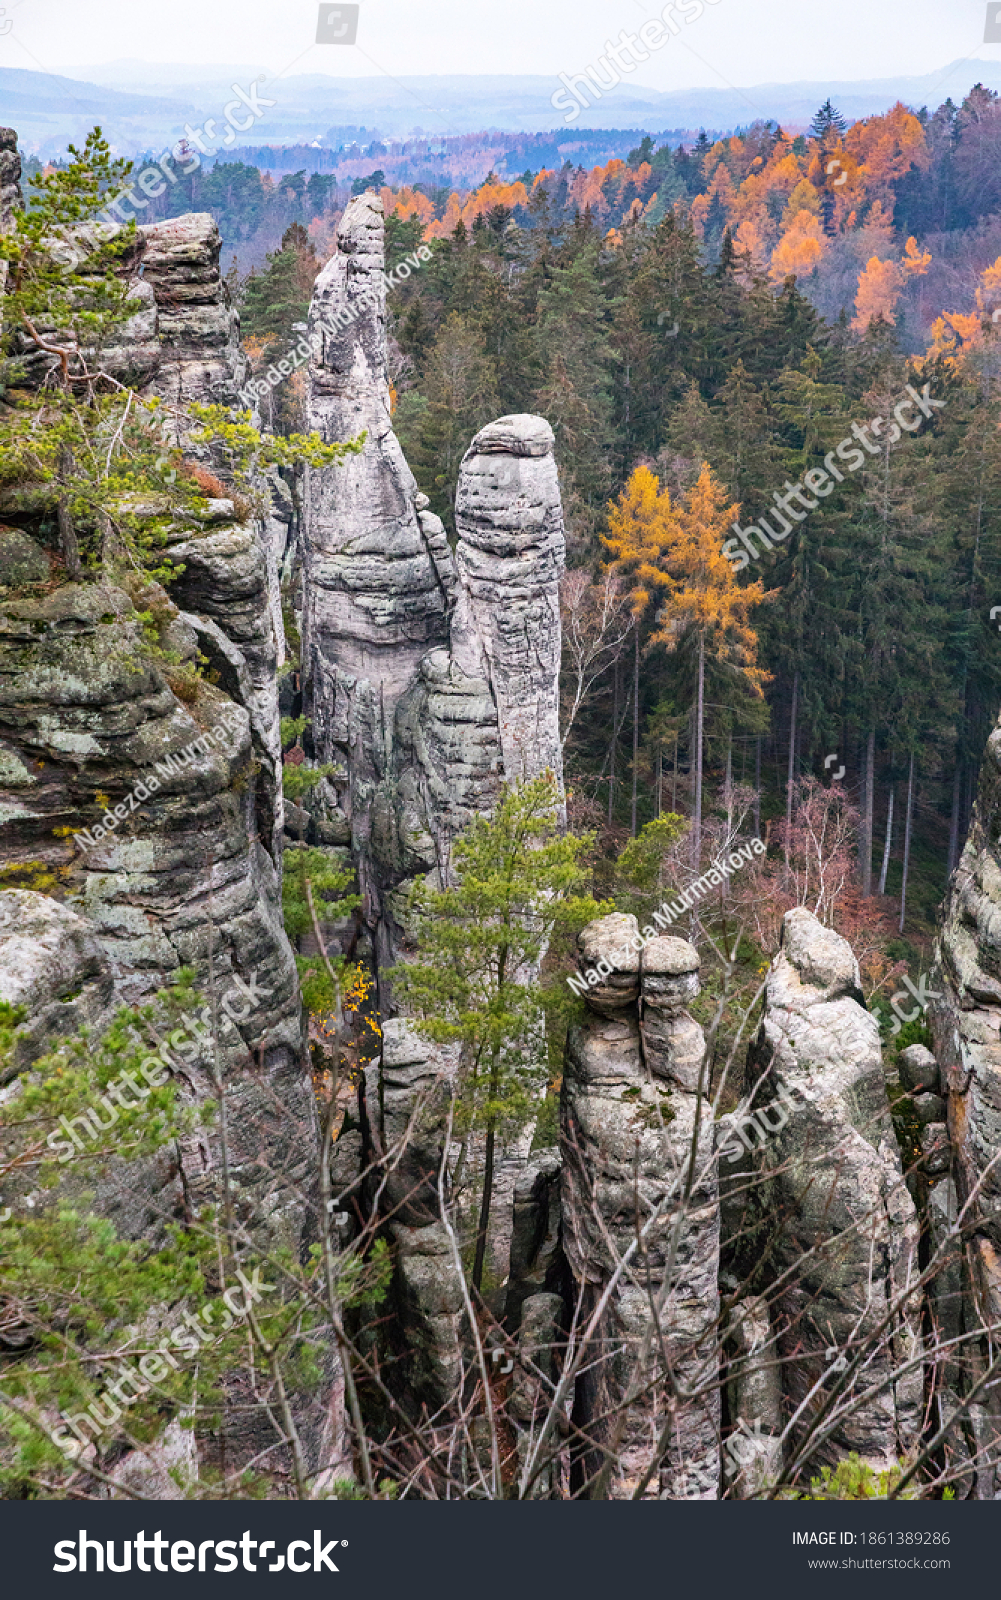 Dominant of the Prachov rocks - Jehla and Capka (Needle and Cap) in beautiful autumn colors. Autumn view of Prachov Rocks - Czech Paradise. Czech republic #1861389286